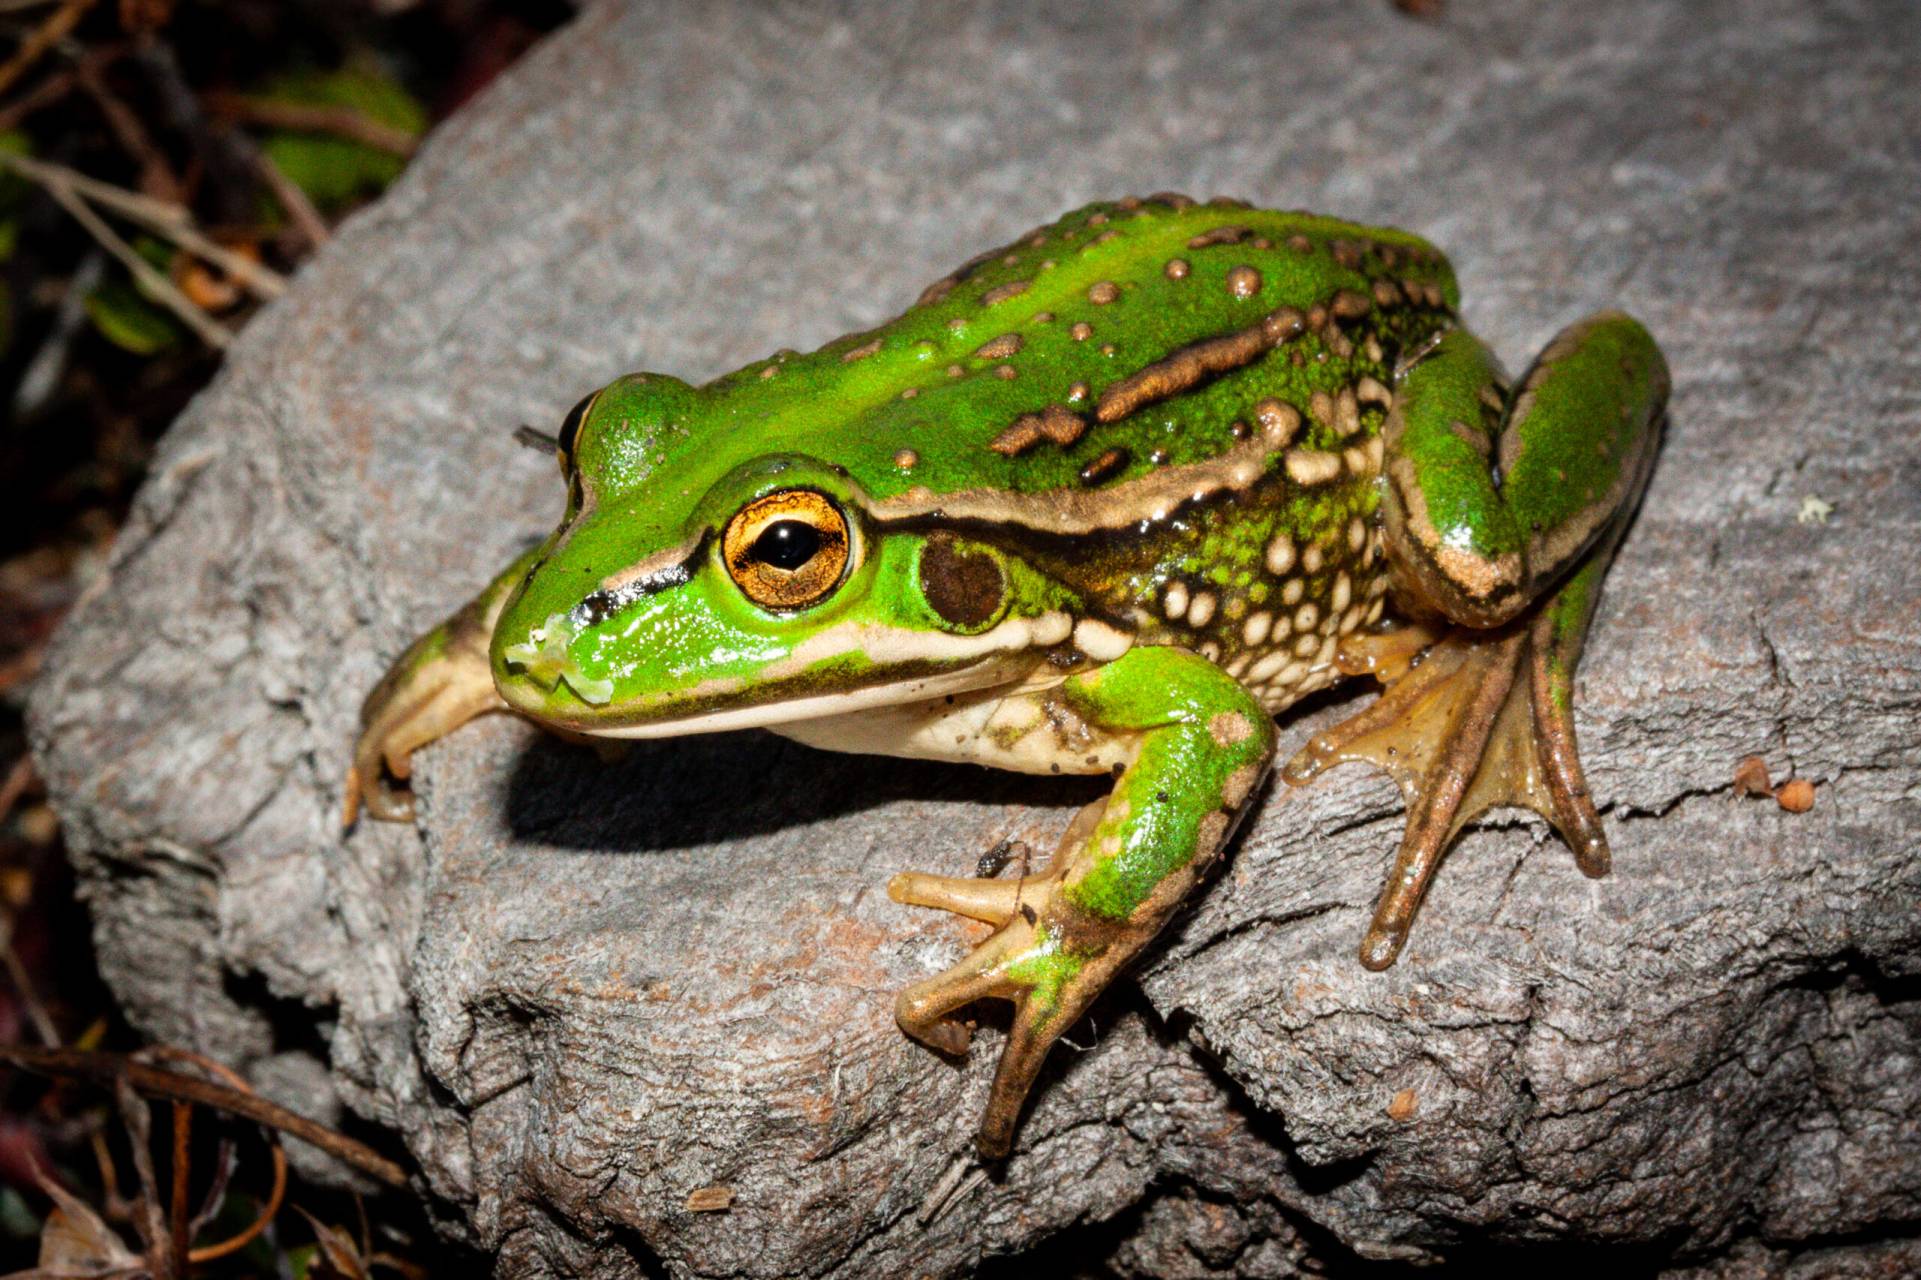 NZFrogs – Information and resources on frog conservation